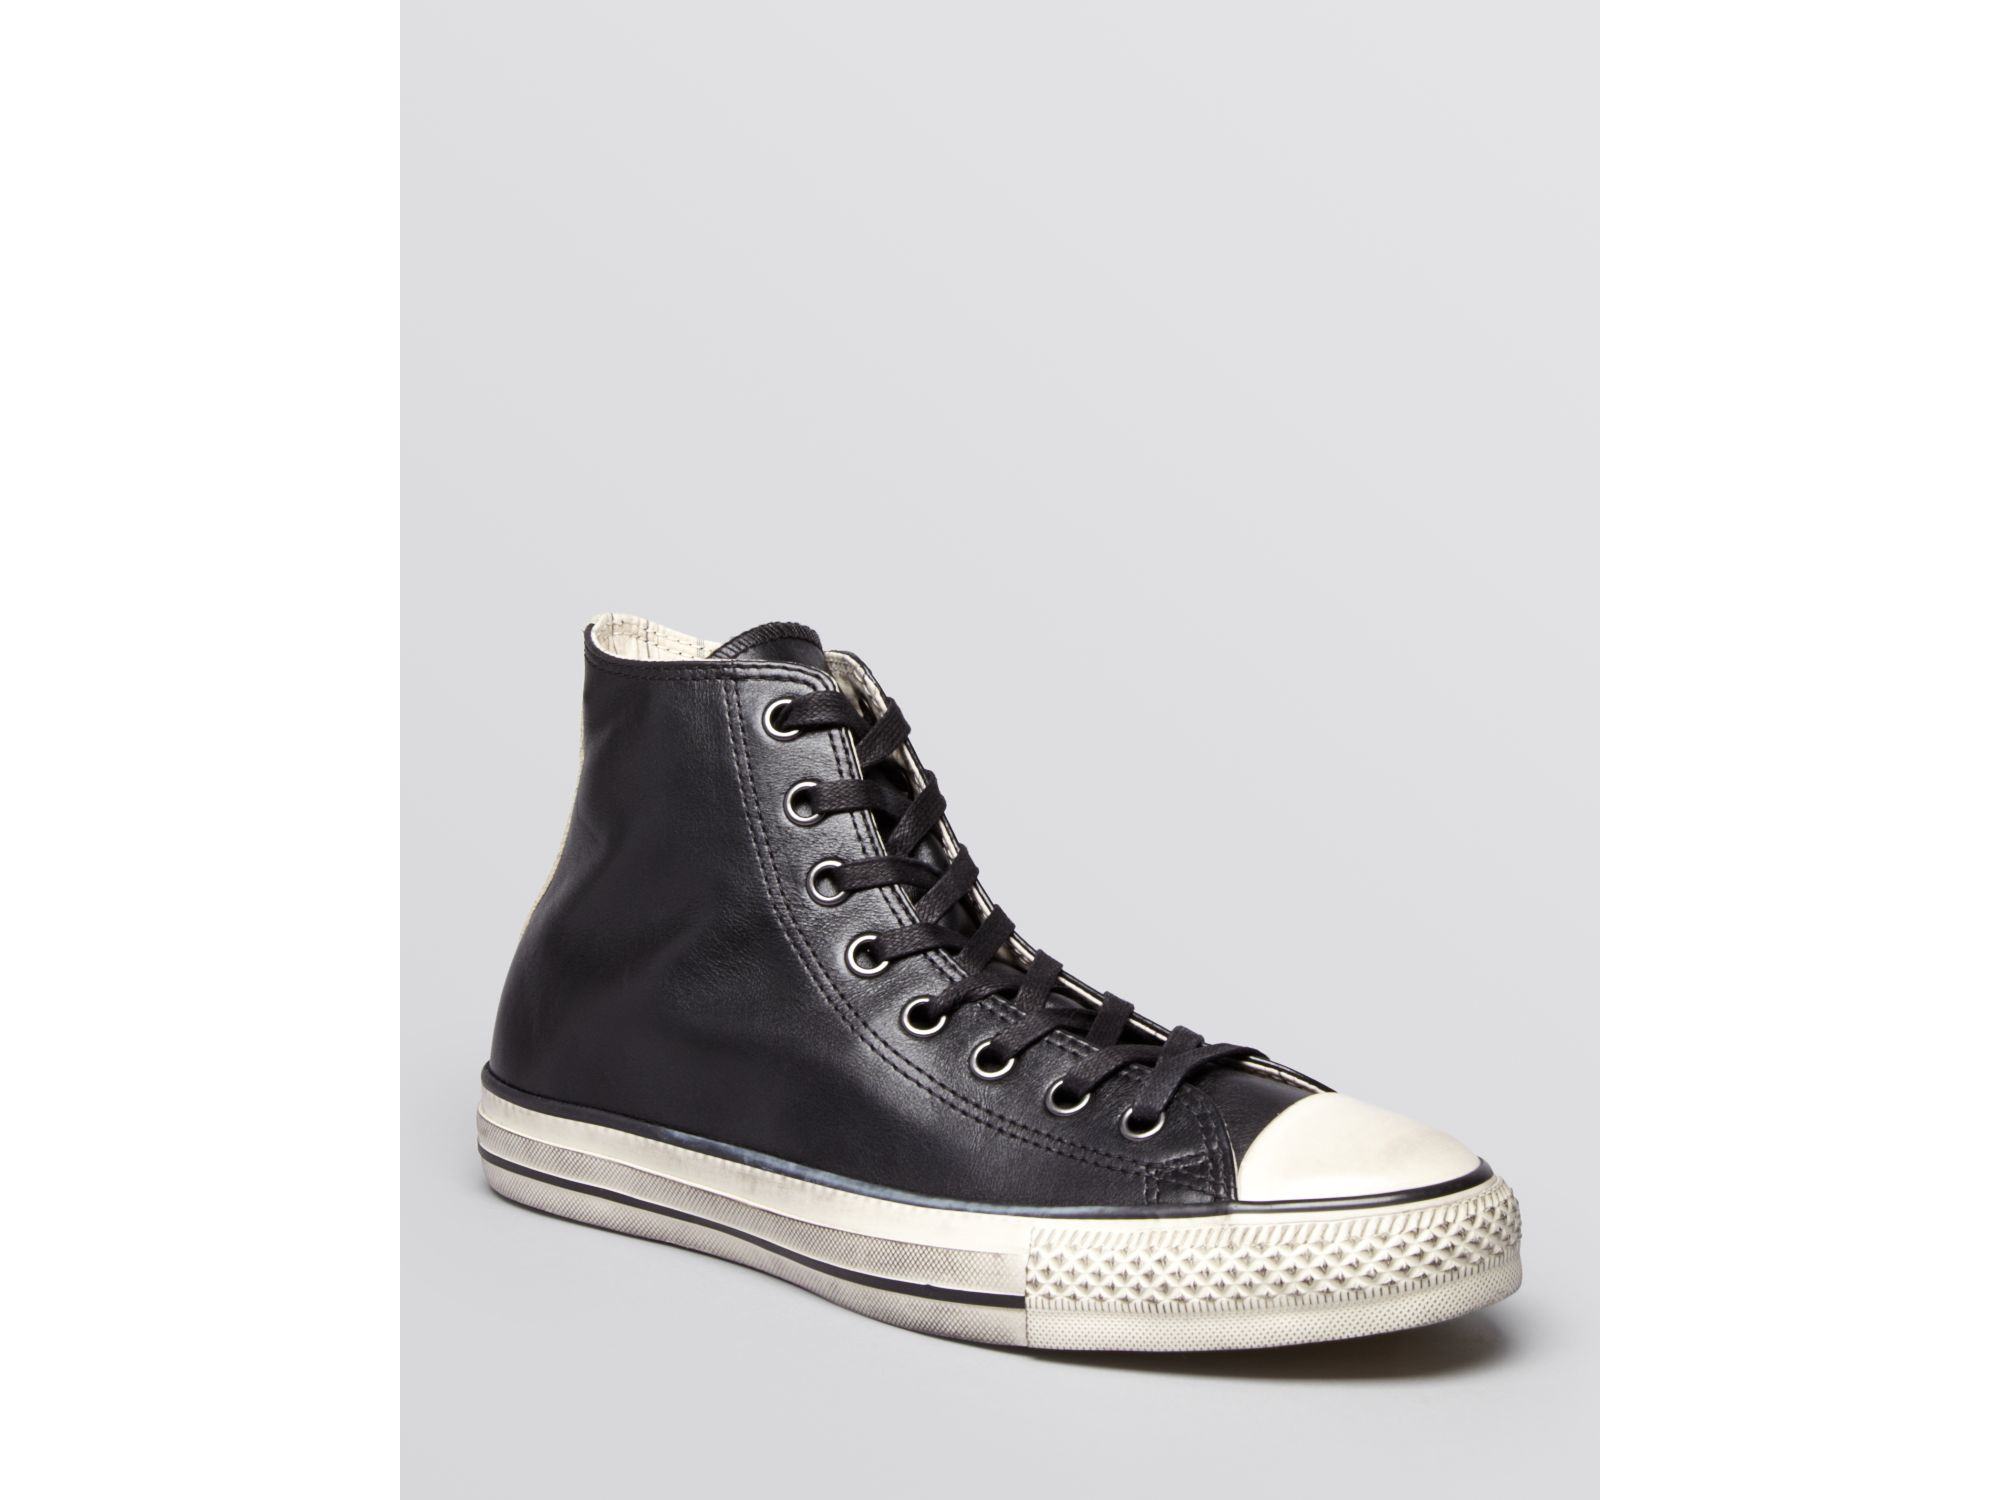 Converse John Varvatos Chuck Taylor All Star Leather Sneakers in Black for Men - Lyst